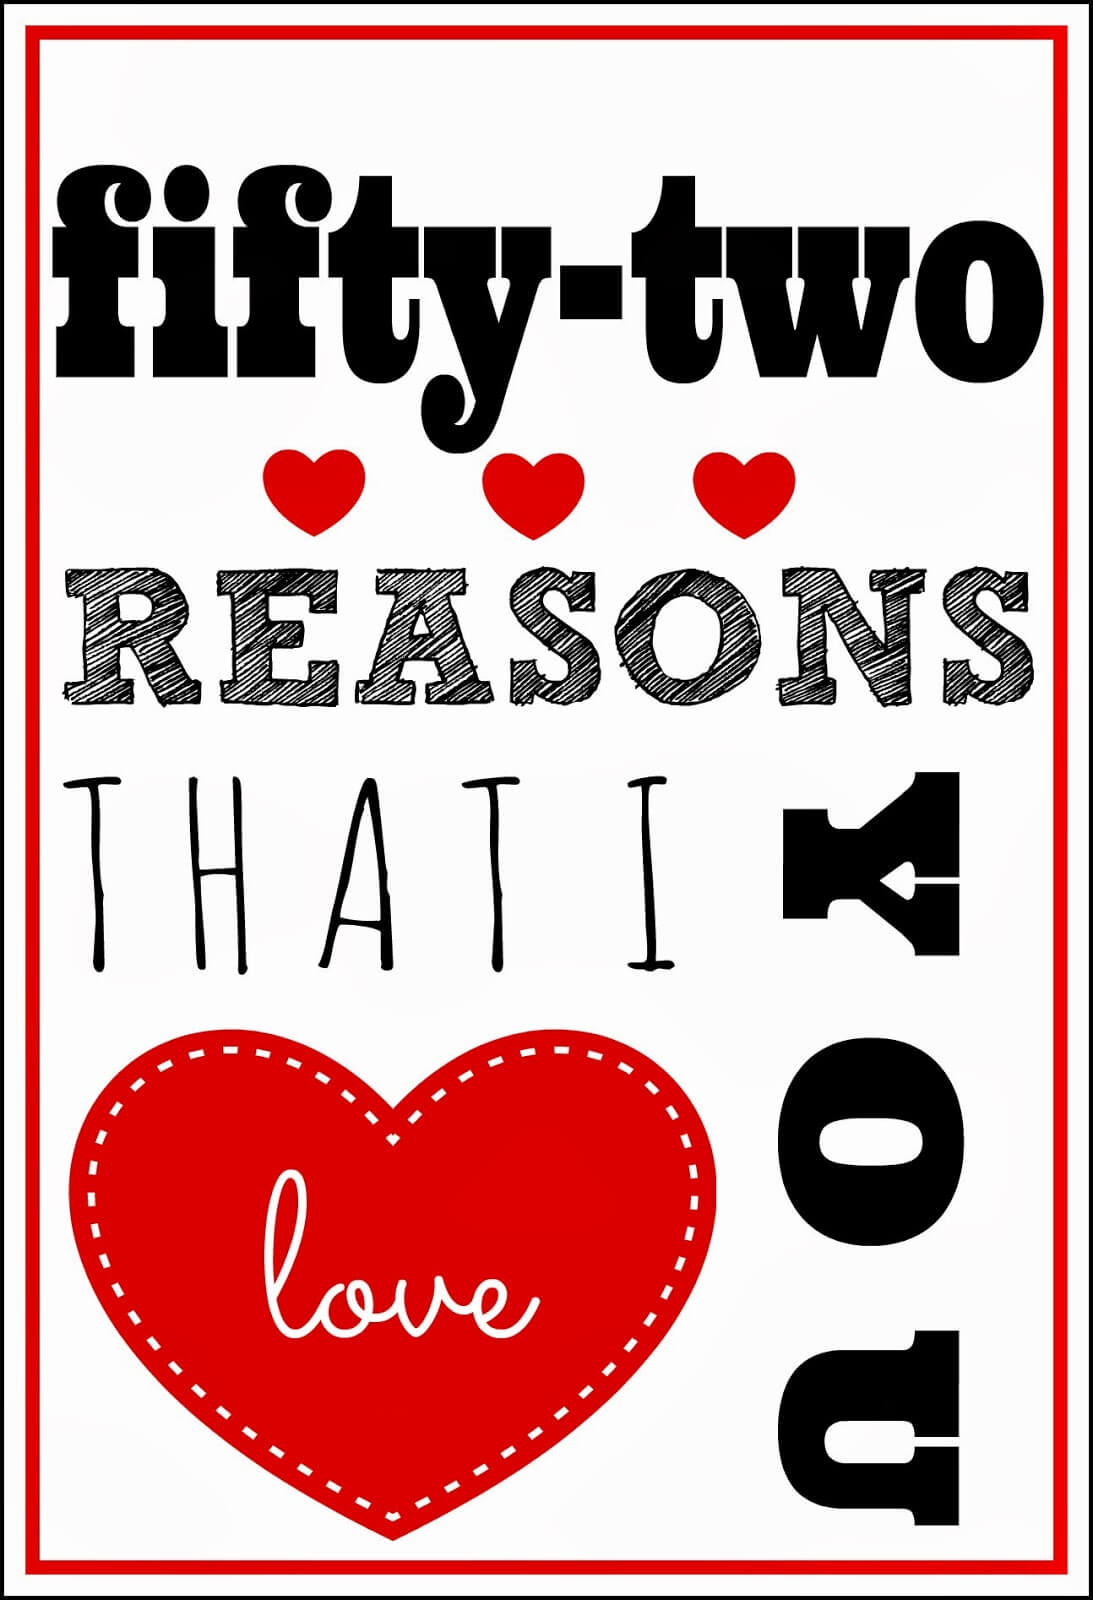 52 Reasons I Love You Template Free ] - 1000 Ideas About 52 Inside 52 Reasons Why I Love You Cards Templates Free